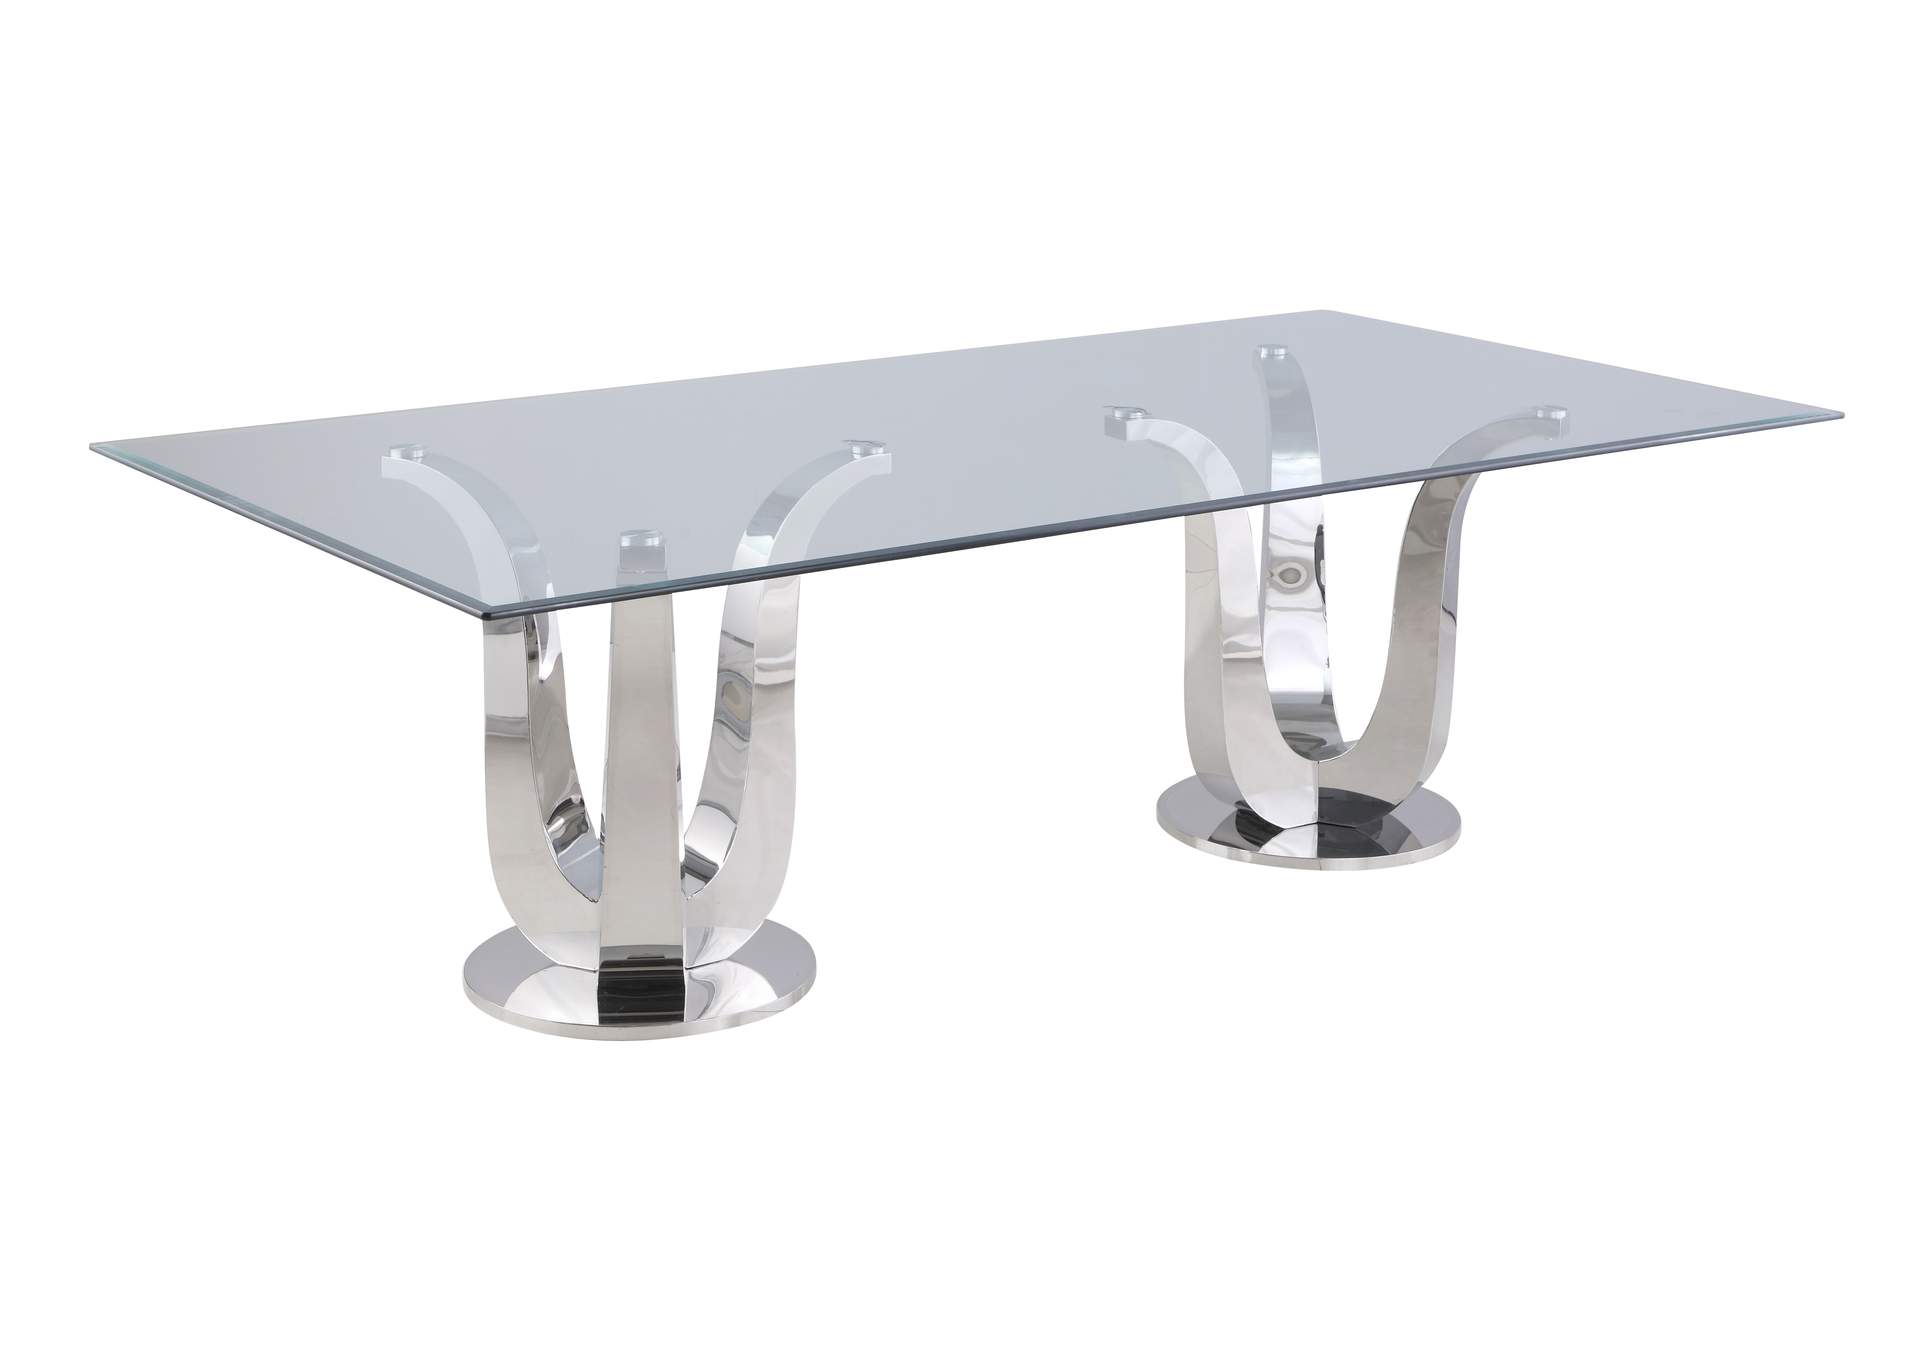 Adelle Contemporary Rectangular Glass Dining Table,Chintaly Imports